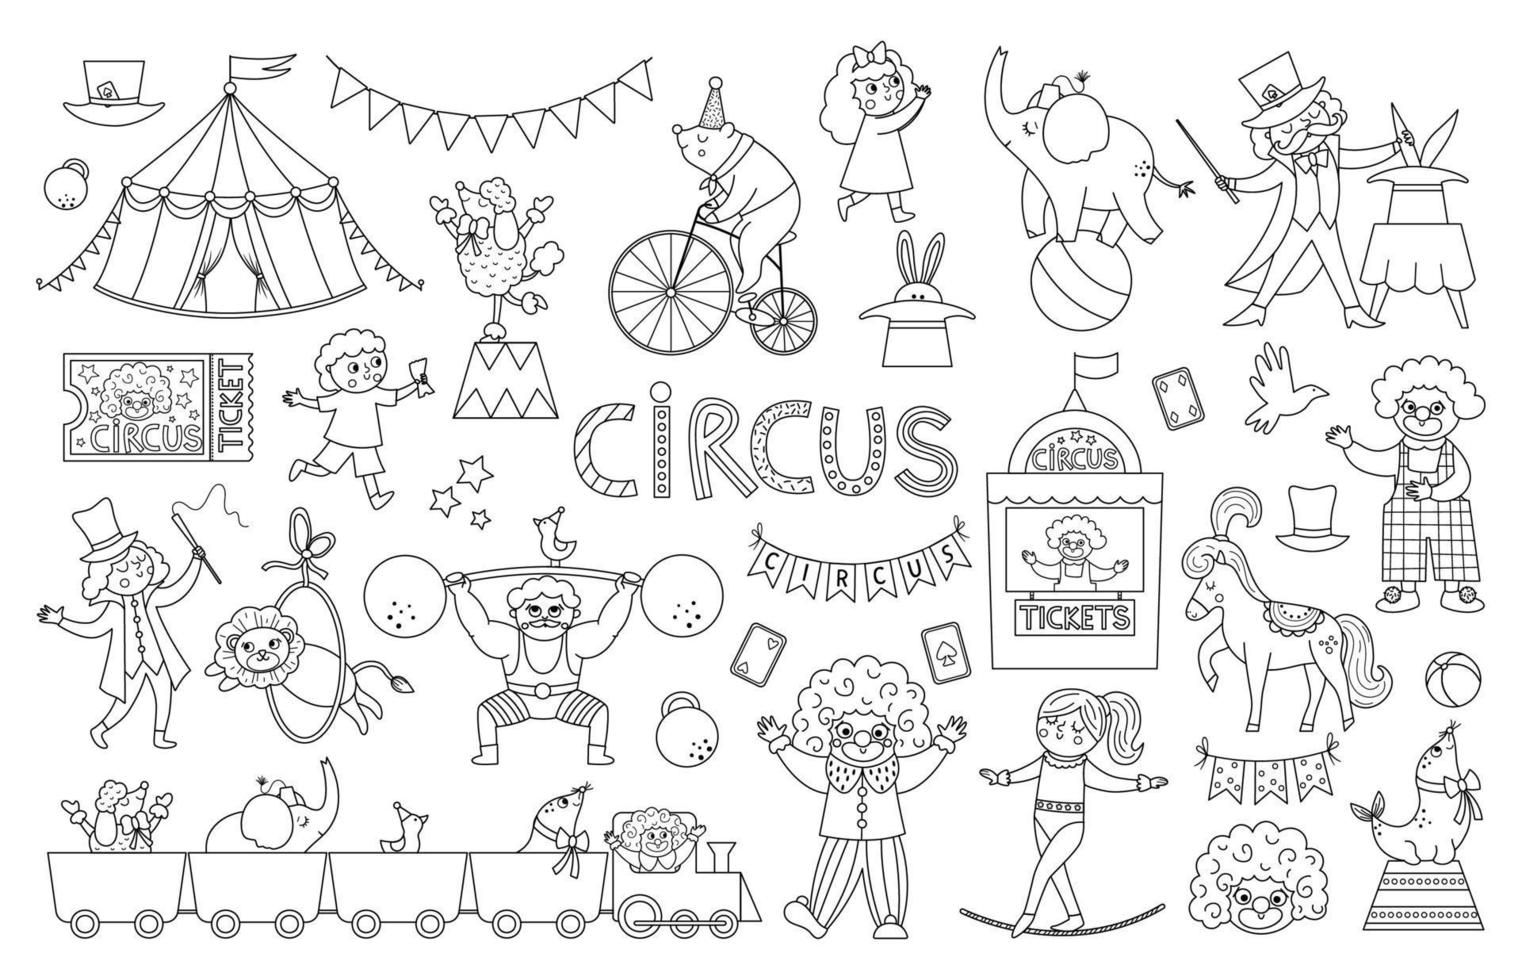 Black Outlined Lined Drawing of Circus Animals for Children's